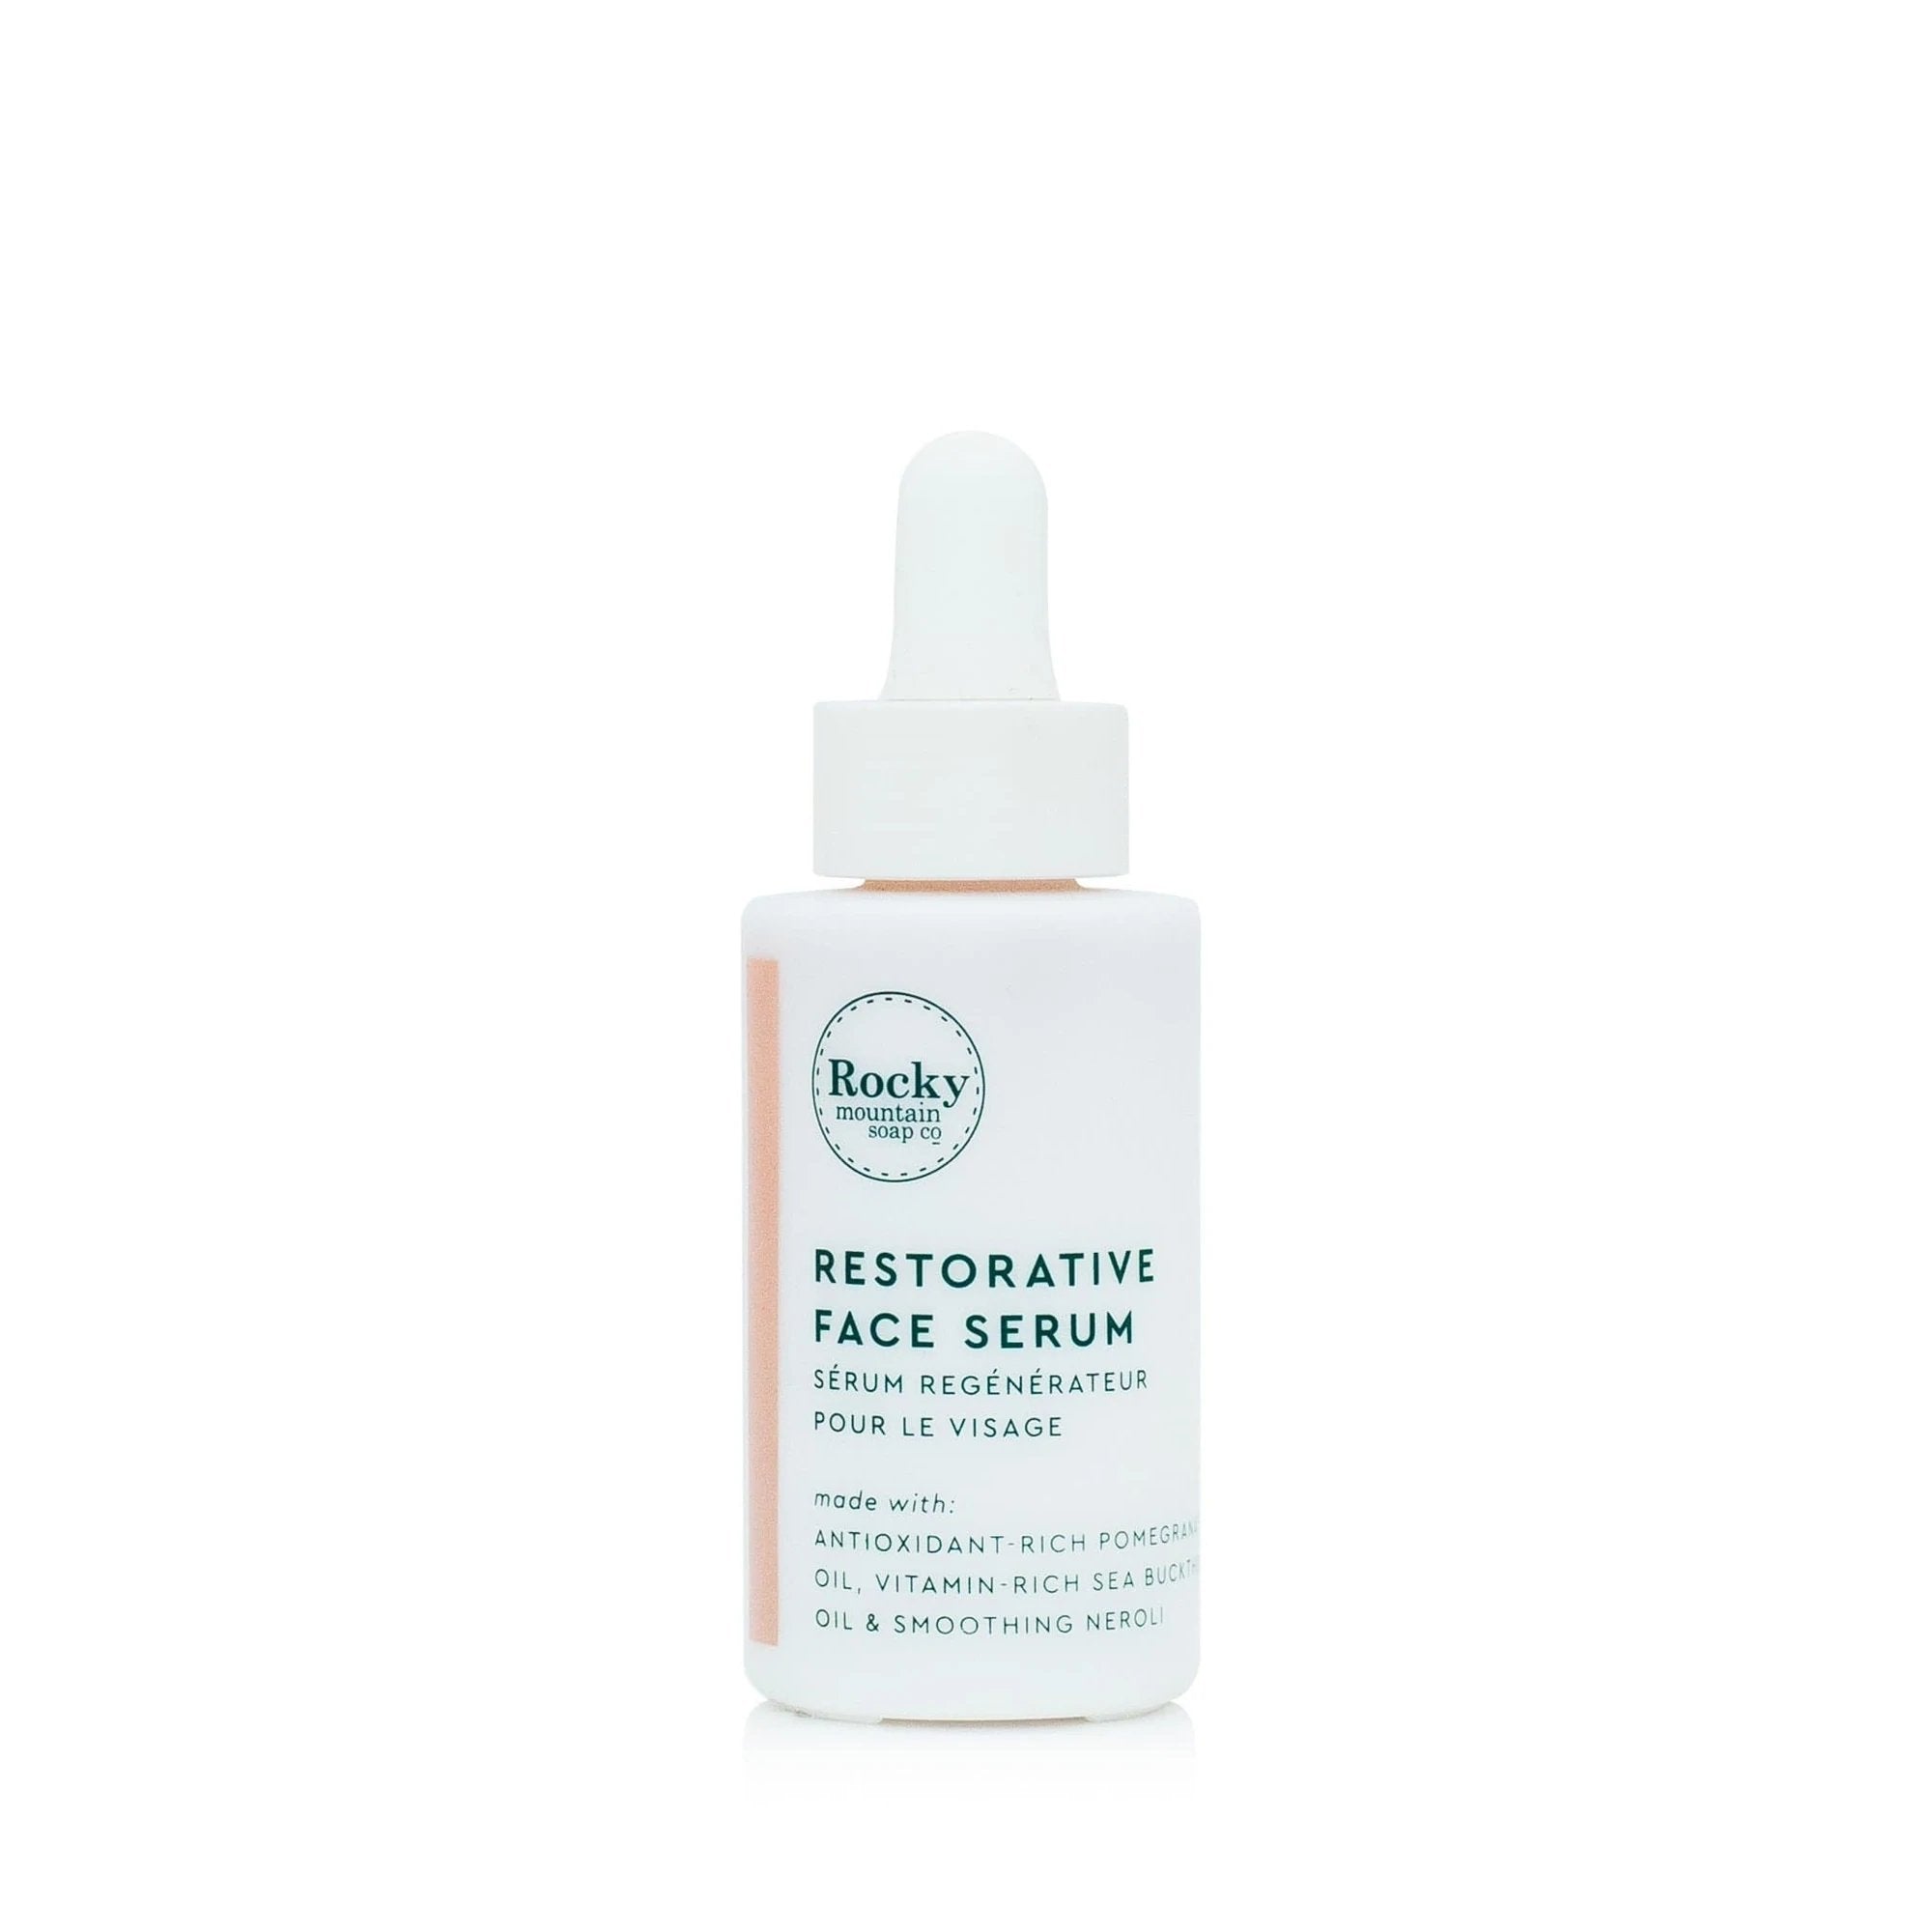 Restorative Natural Face Serum by Rocky Mountain Soap Company